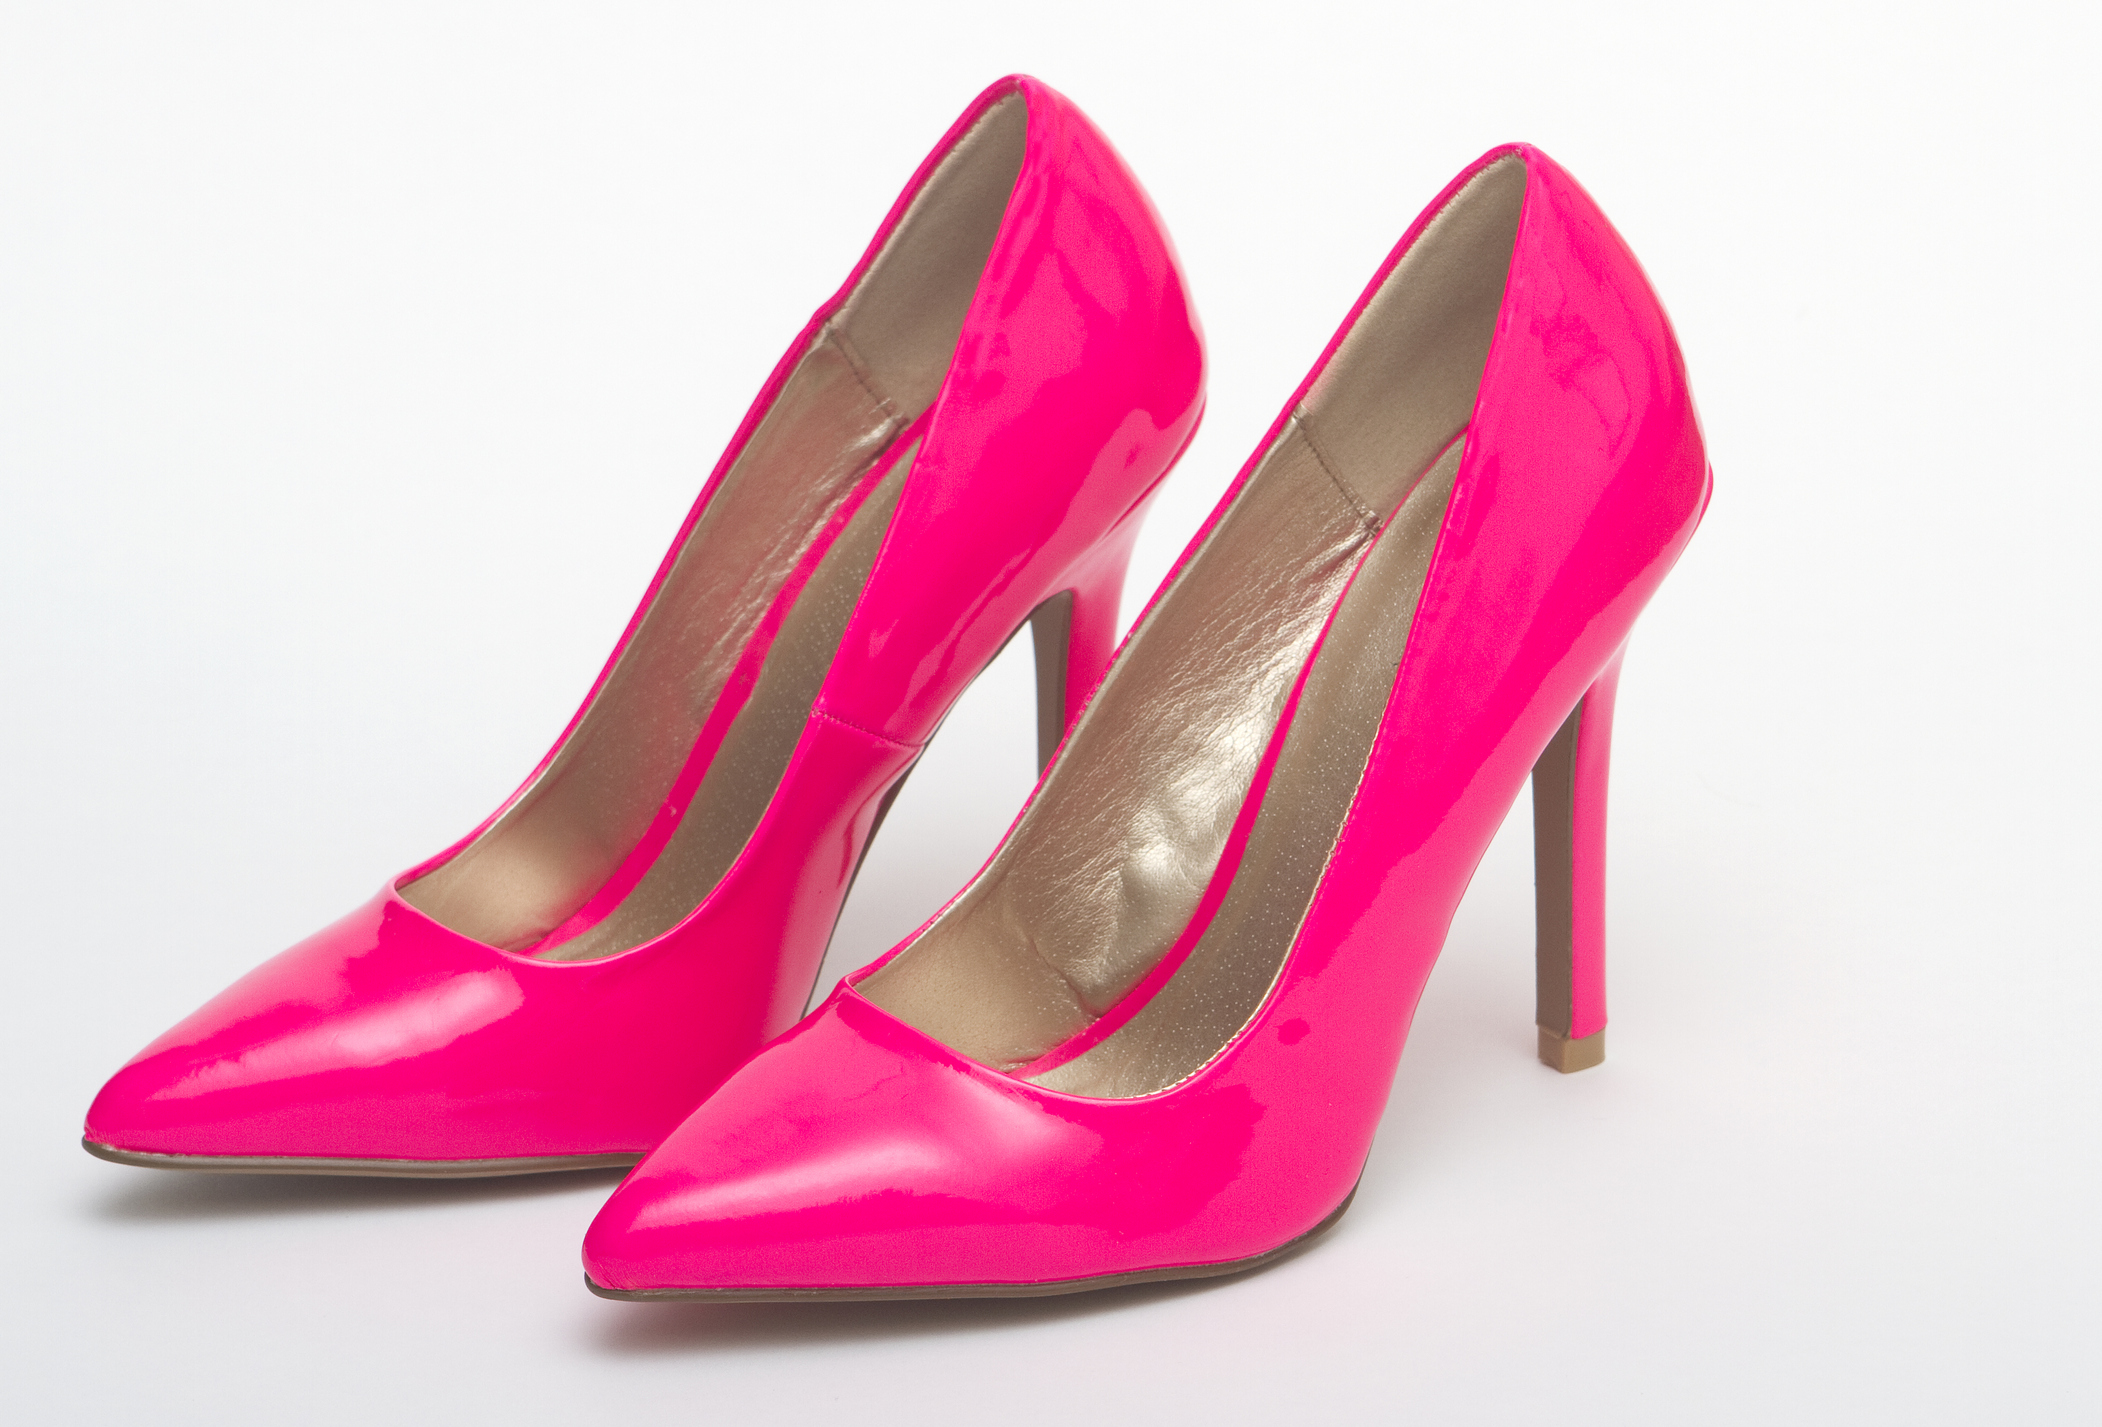 Social Media Mocks Canadian Male Parliament Members Parading Around In Hot Pink Heels